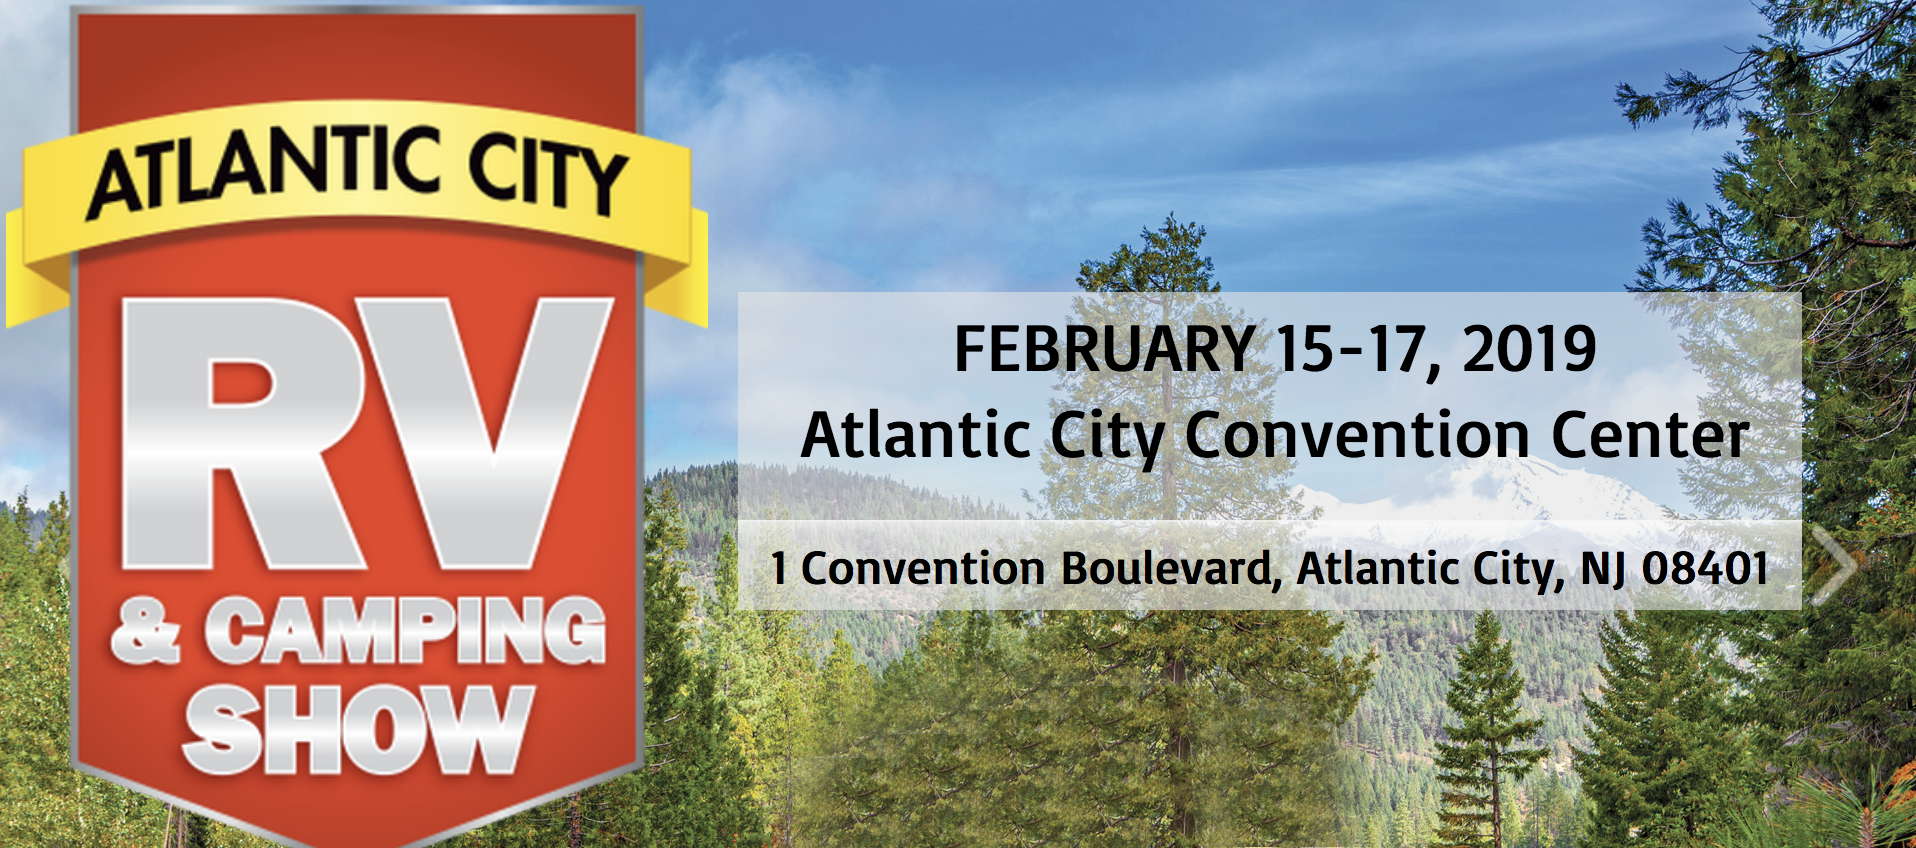 Atlantic City RV & Camping Show GDRV4Life Your Connection to the